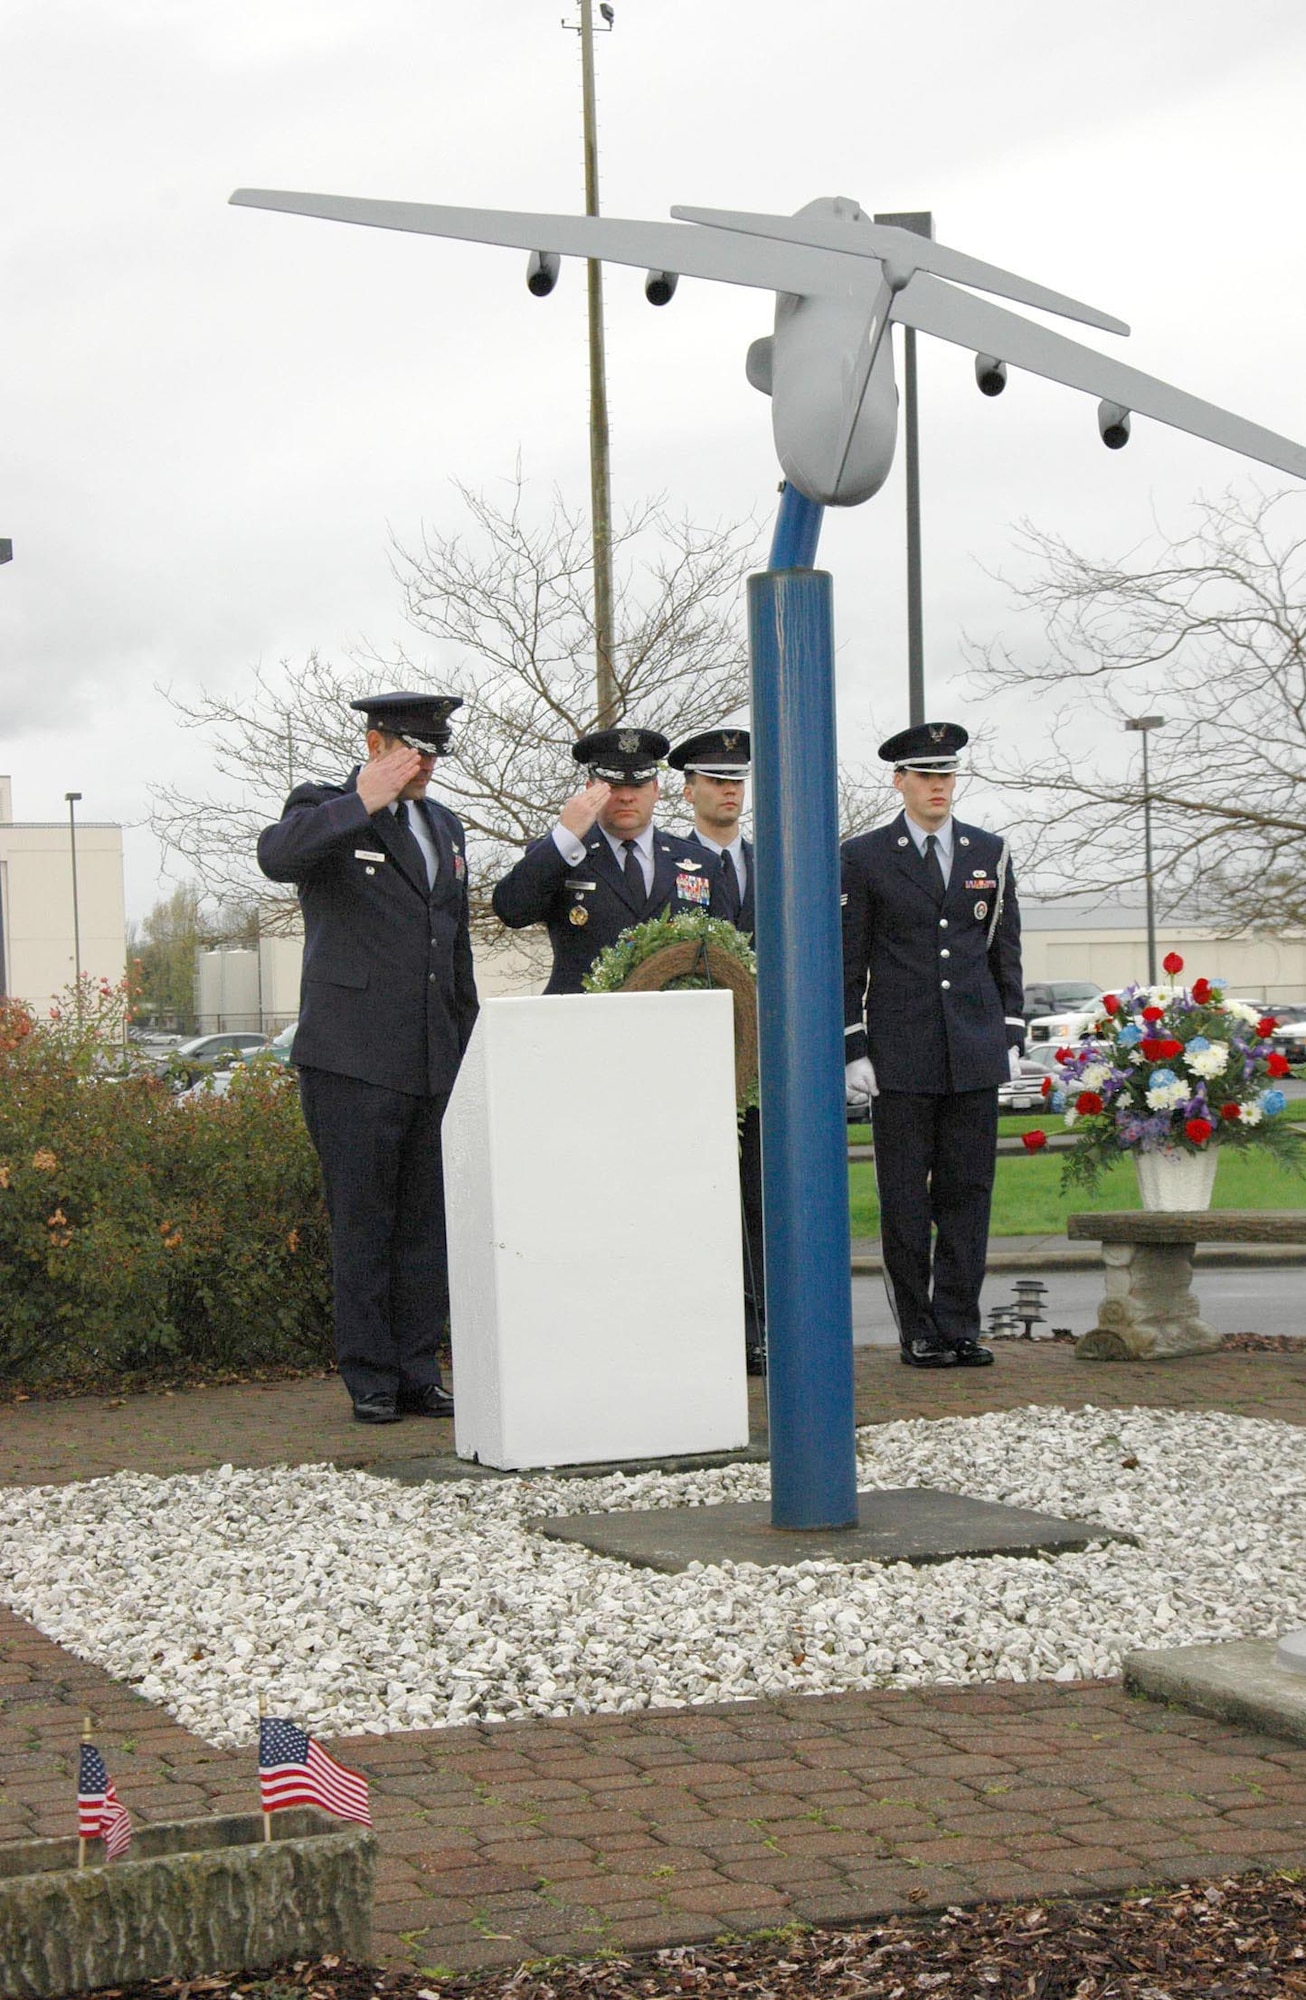 Col. Rick Grayson, 446th Airlift Wing vice commander, (left) and Col. Jeffrey Philippart, 62nd AW vice commander, render salutes Nov. 30, in remembrance of 13 aviators who died 20 years ago this day in 1992. The 13 McChord Airmen were killed when two C-141s from McChord Air Force Base, Wash., collided over Montana during an air refueling training mission. (U.S. Air Force photo by Sandra Pishner)